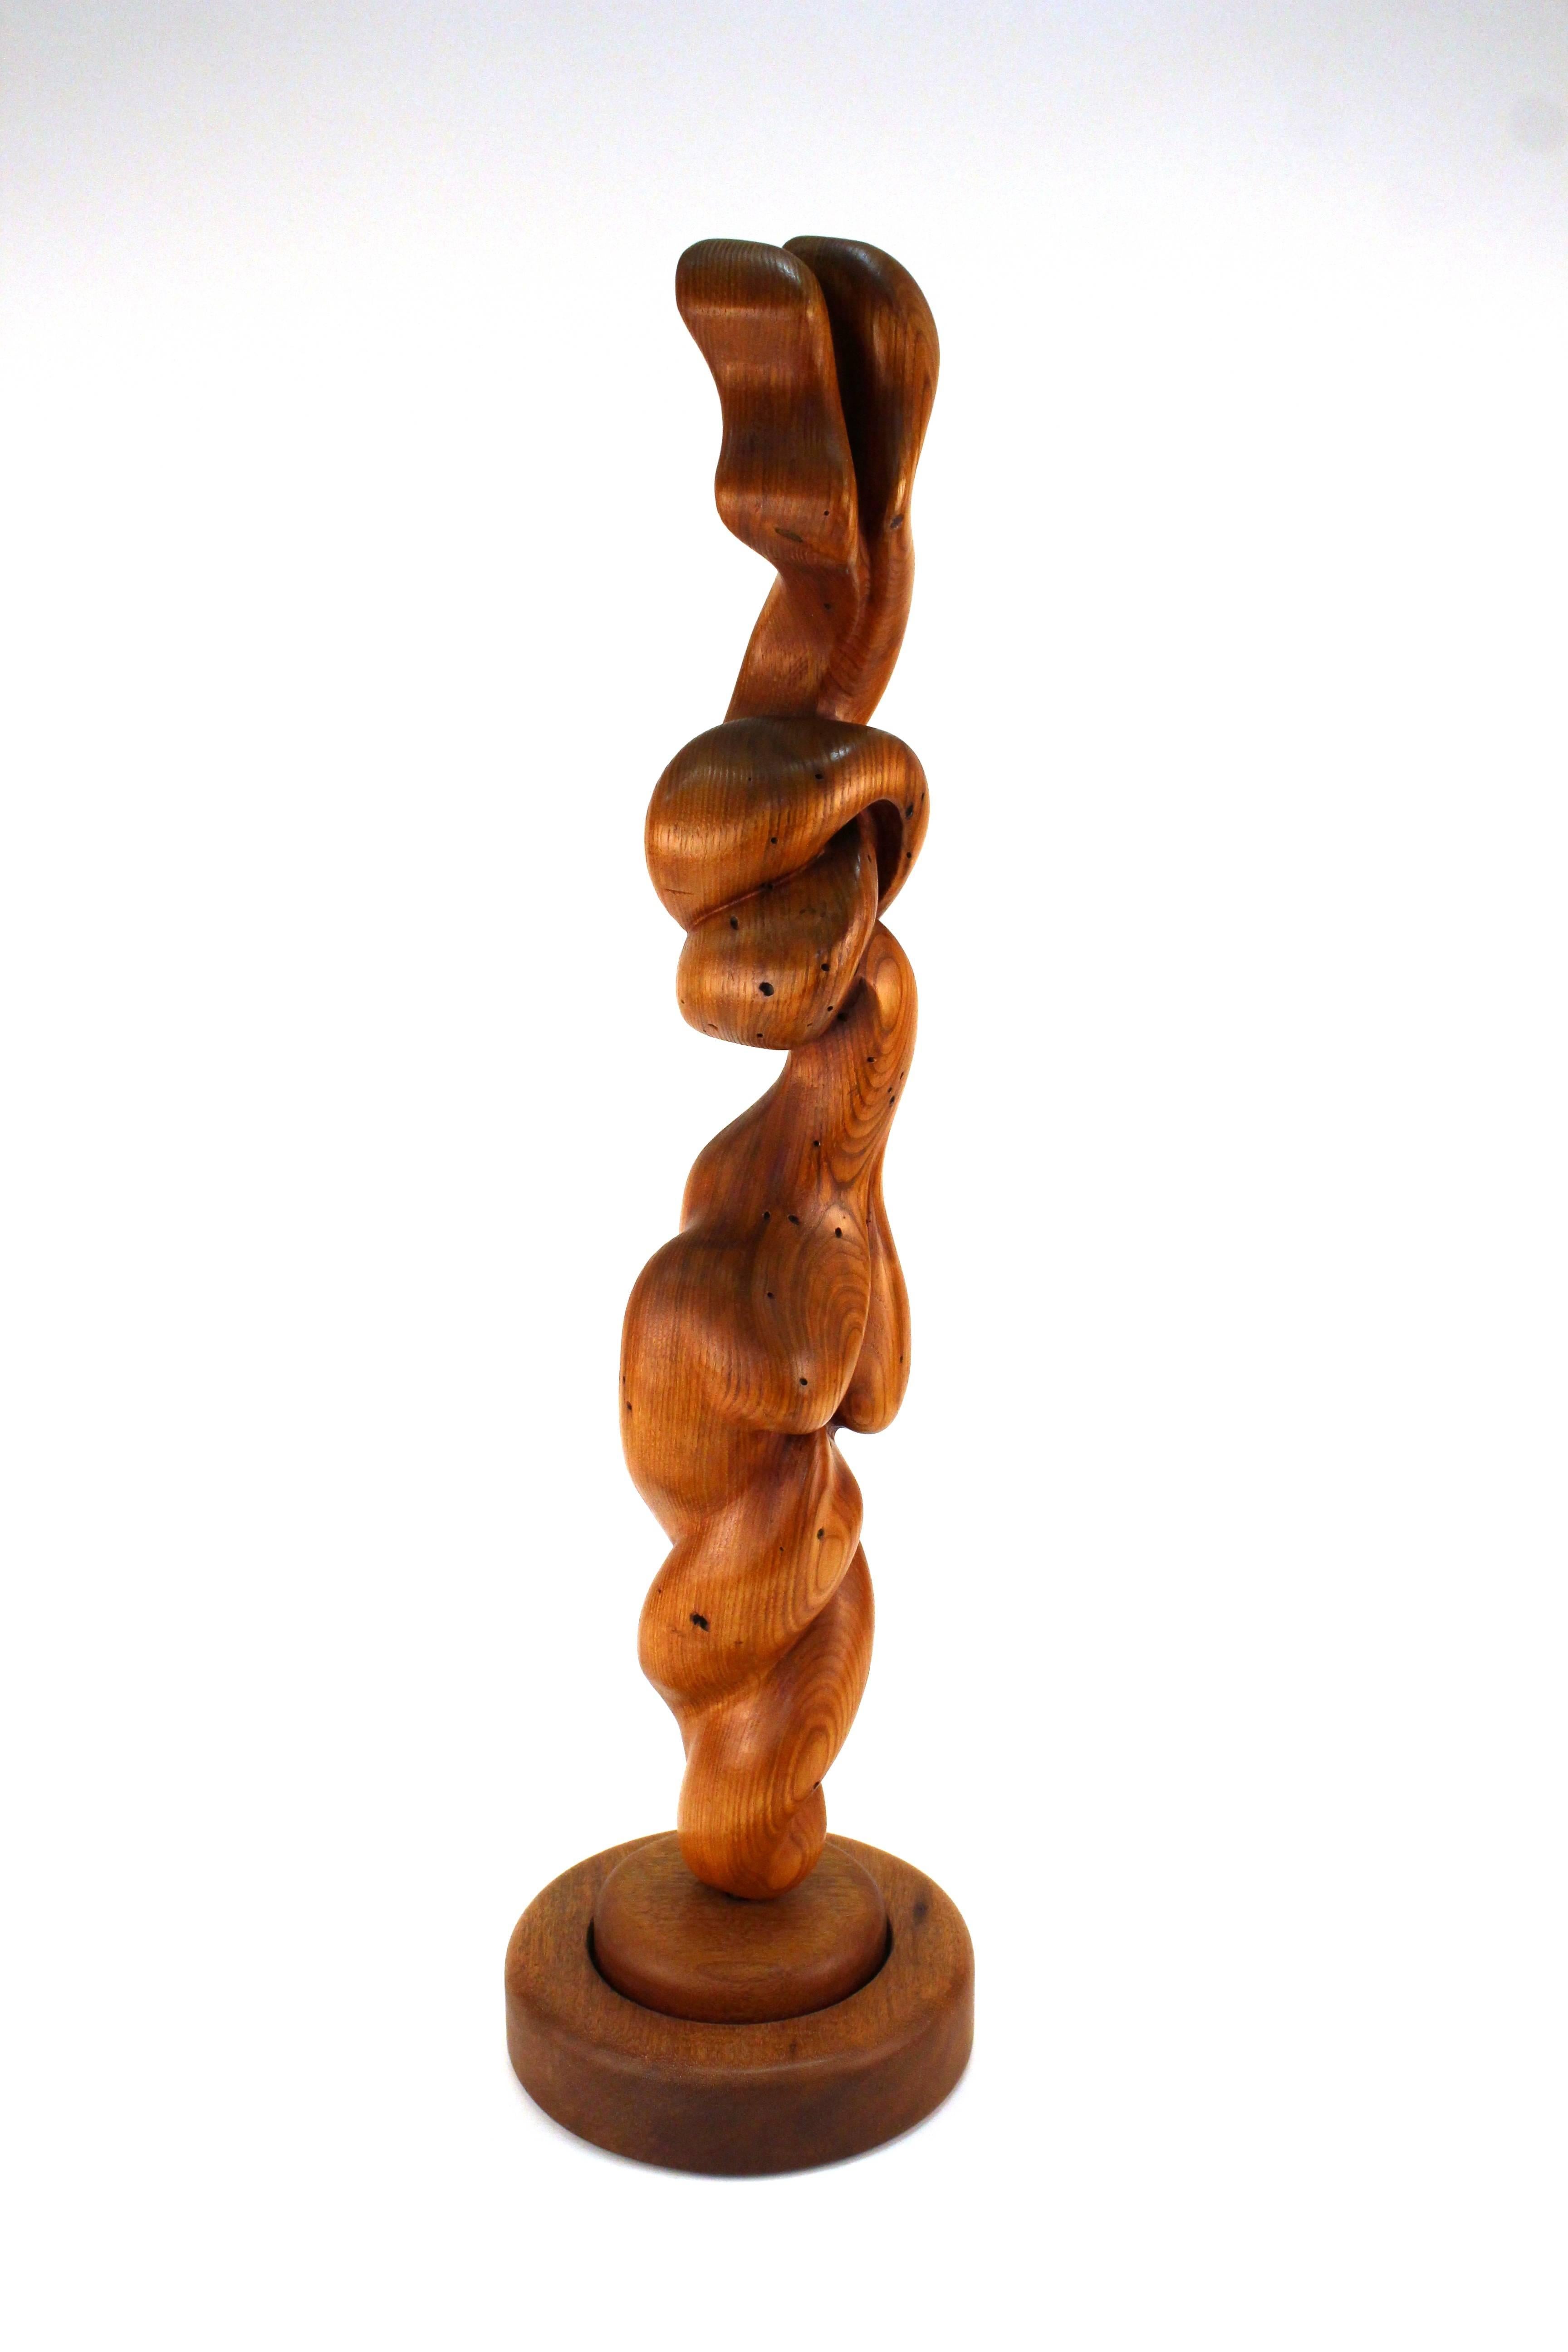 A Biomorphic wooden sculpture in sinuous curves and forms evocative of the human form, on a circular rotating wooden base. The sculpted wood shows its natural grain. Unknown artist's mark on the lower edge where the sculpture meets the base. In